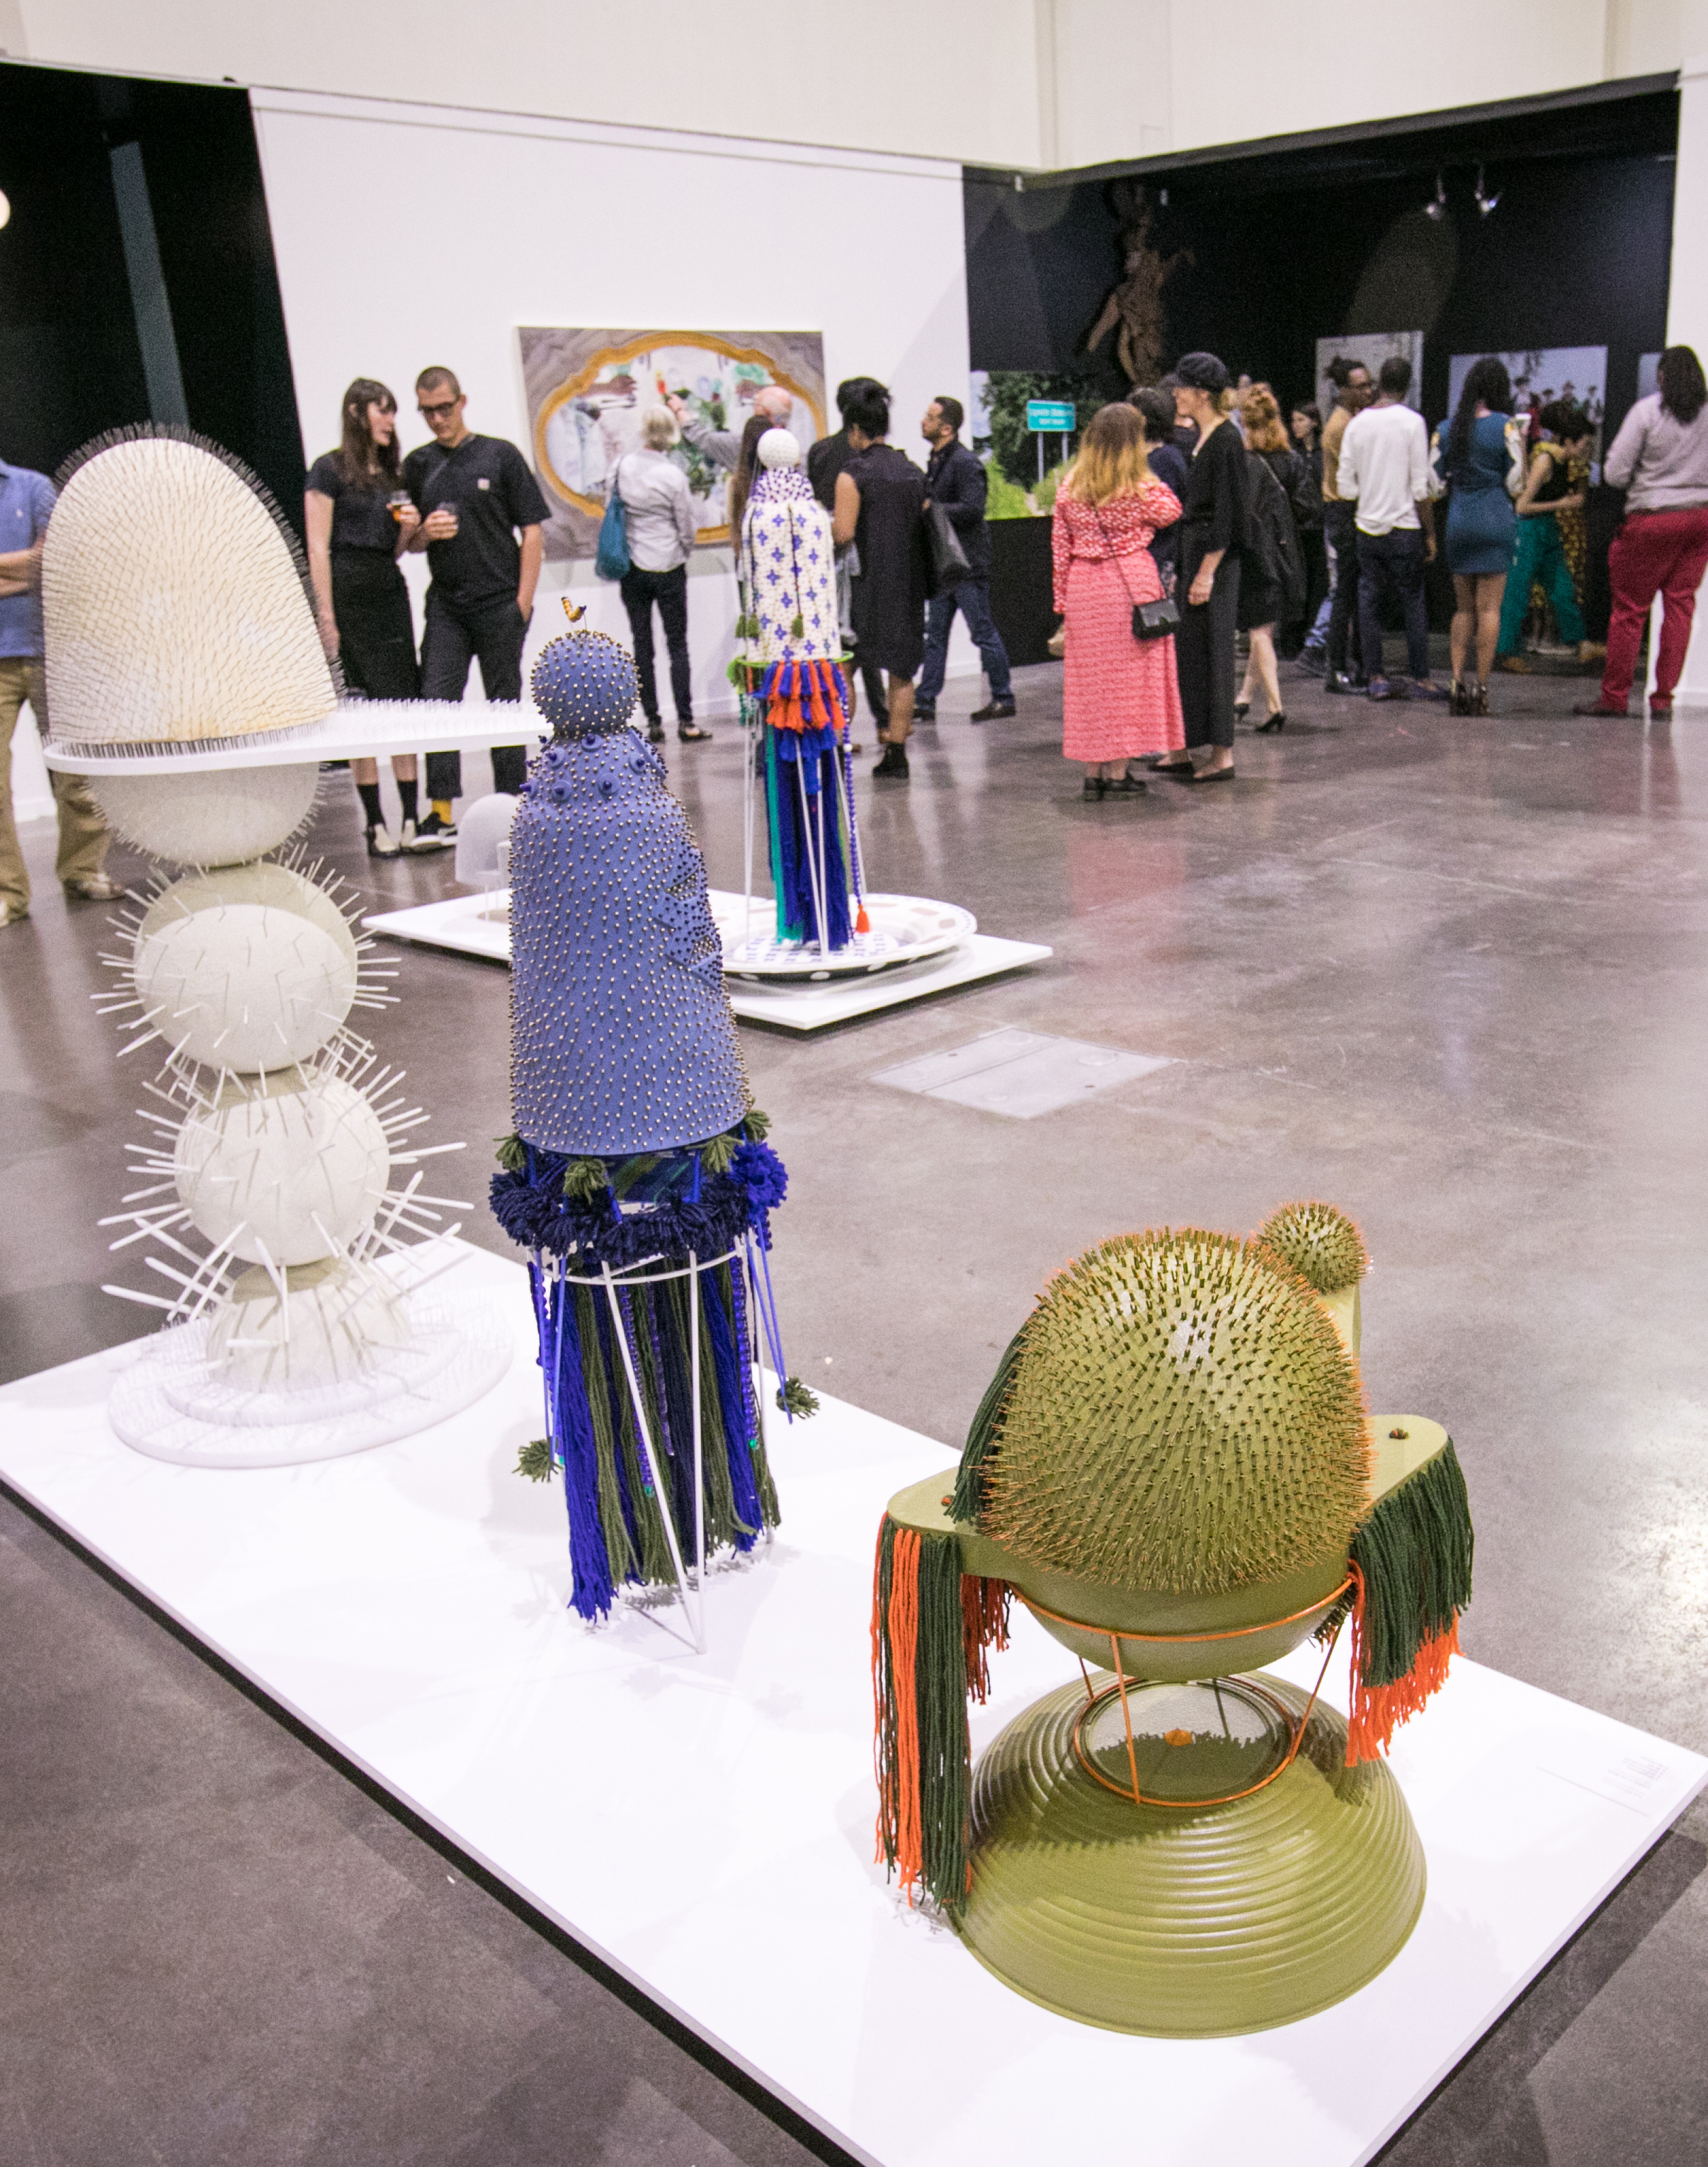 Ceramic objects on display at the Grad Show